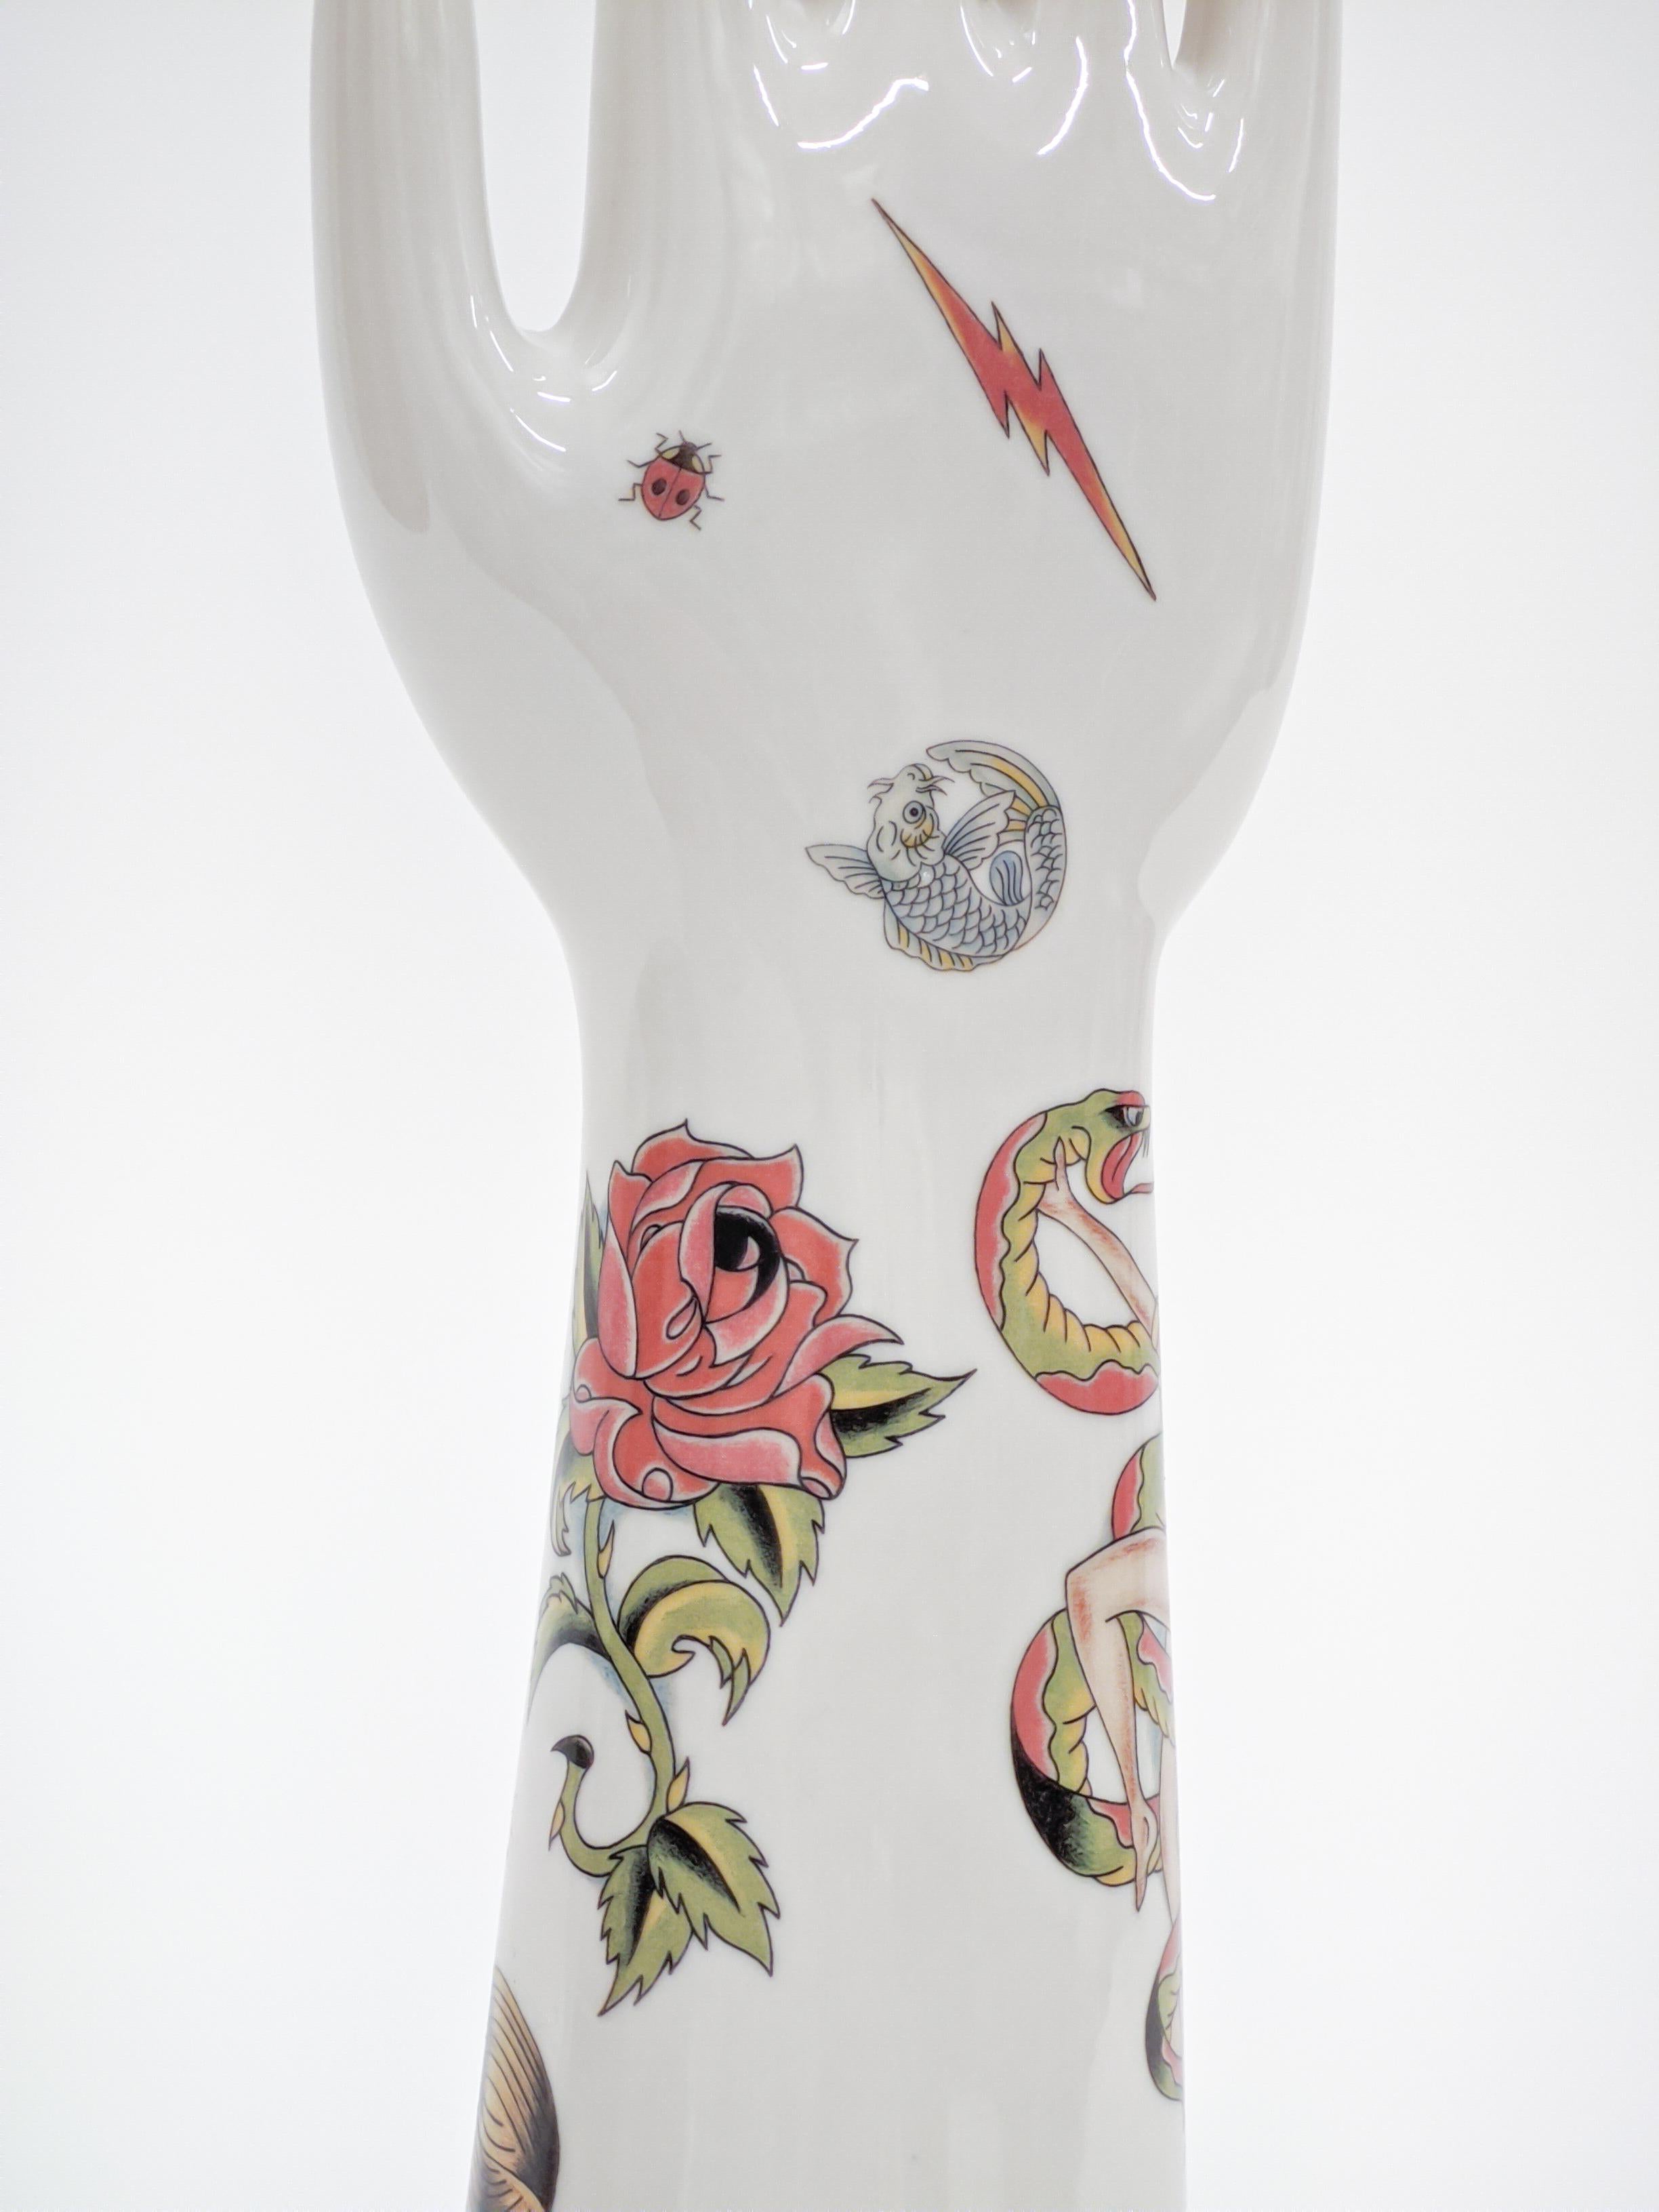 Molded Anatomica, Porcelain Hand with Old School Tattoo Decoration by Vito Nesta For Sale